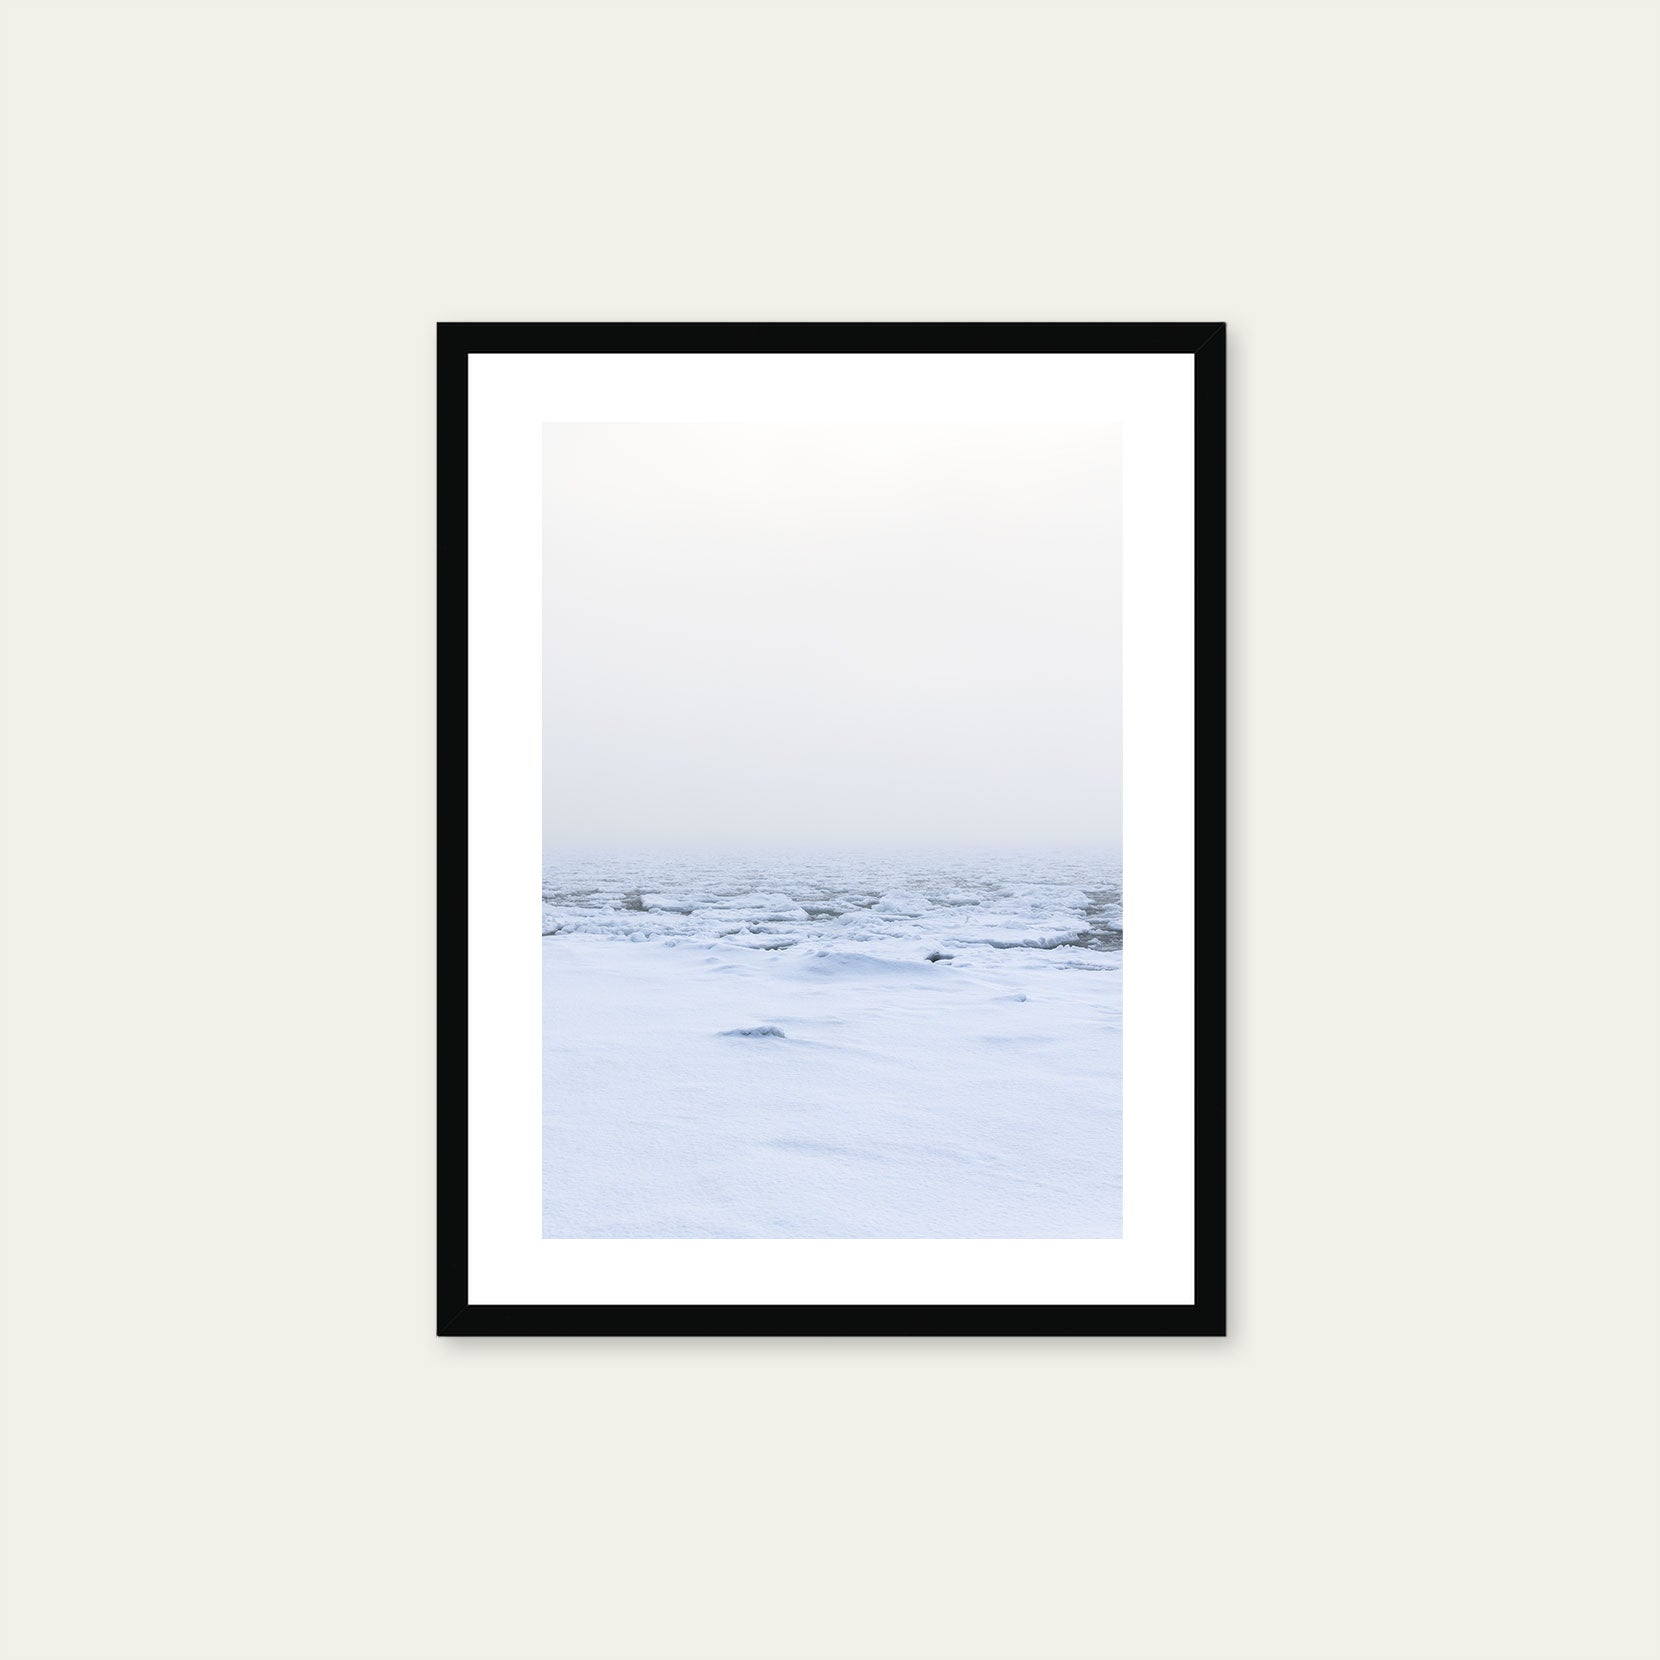 A black framed print of a snow covered shoreline with fog